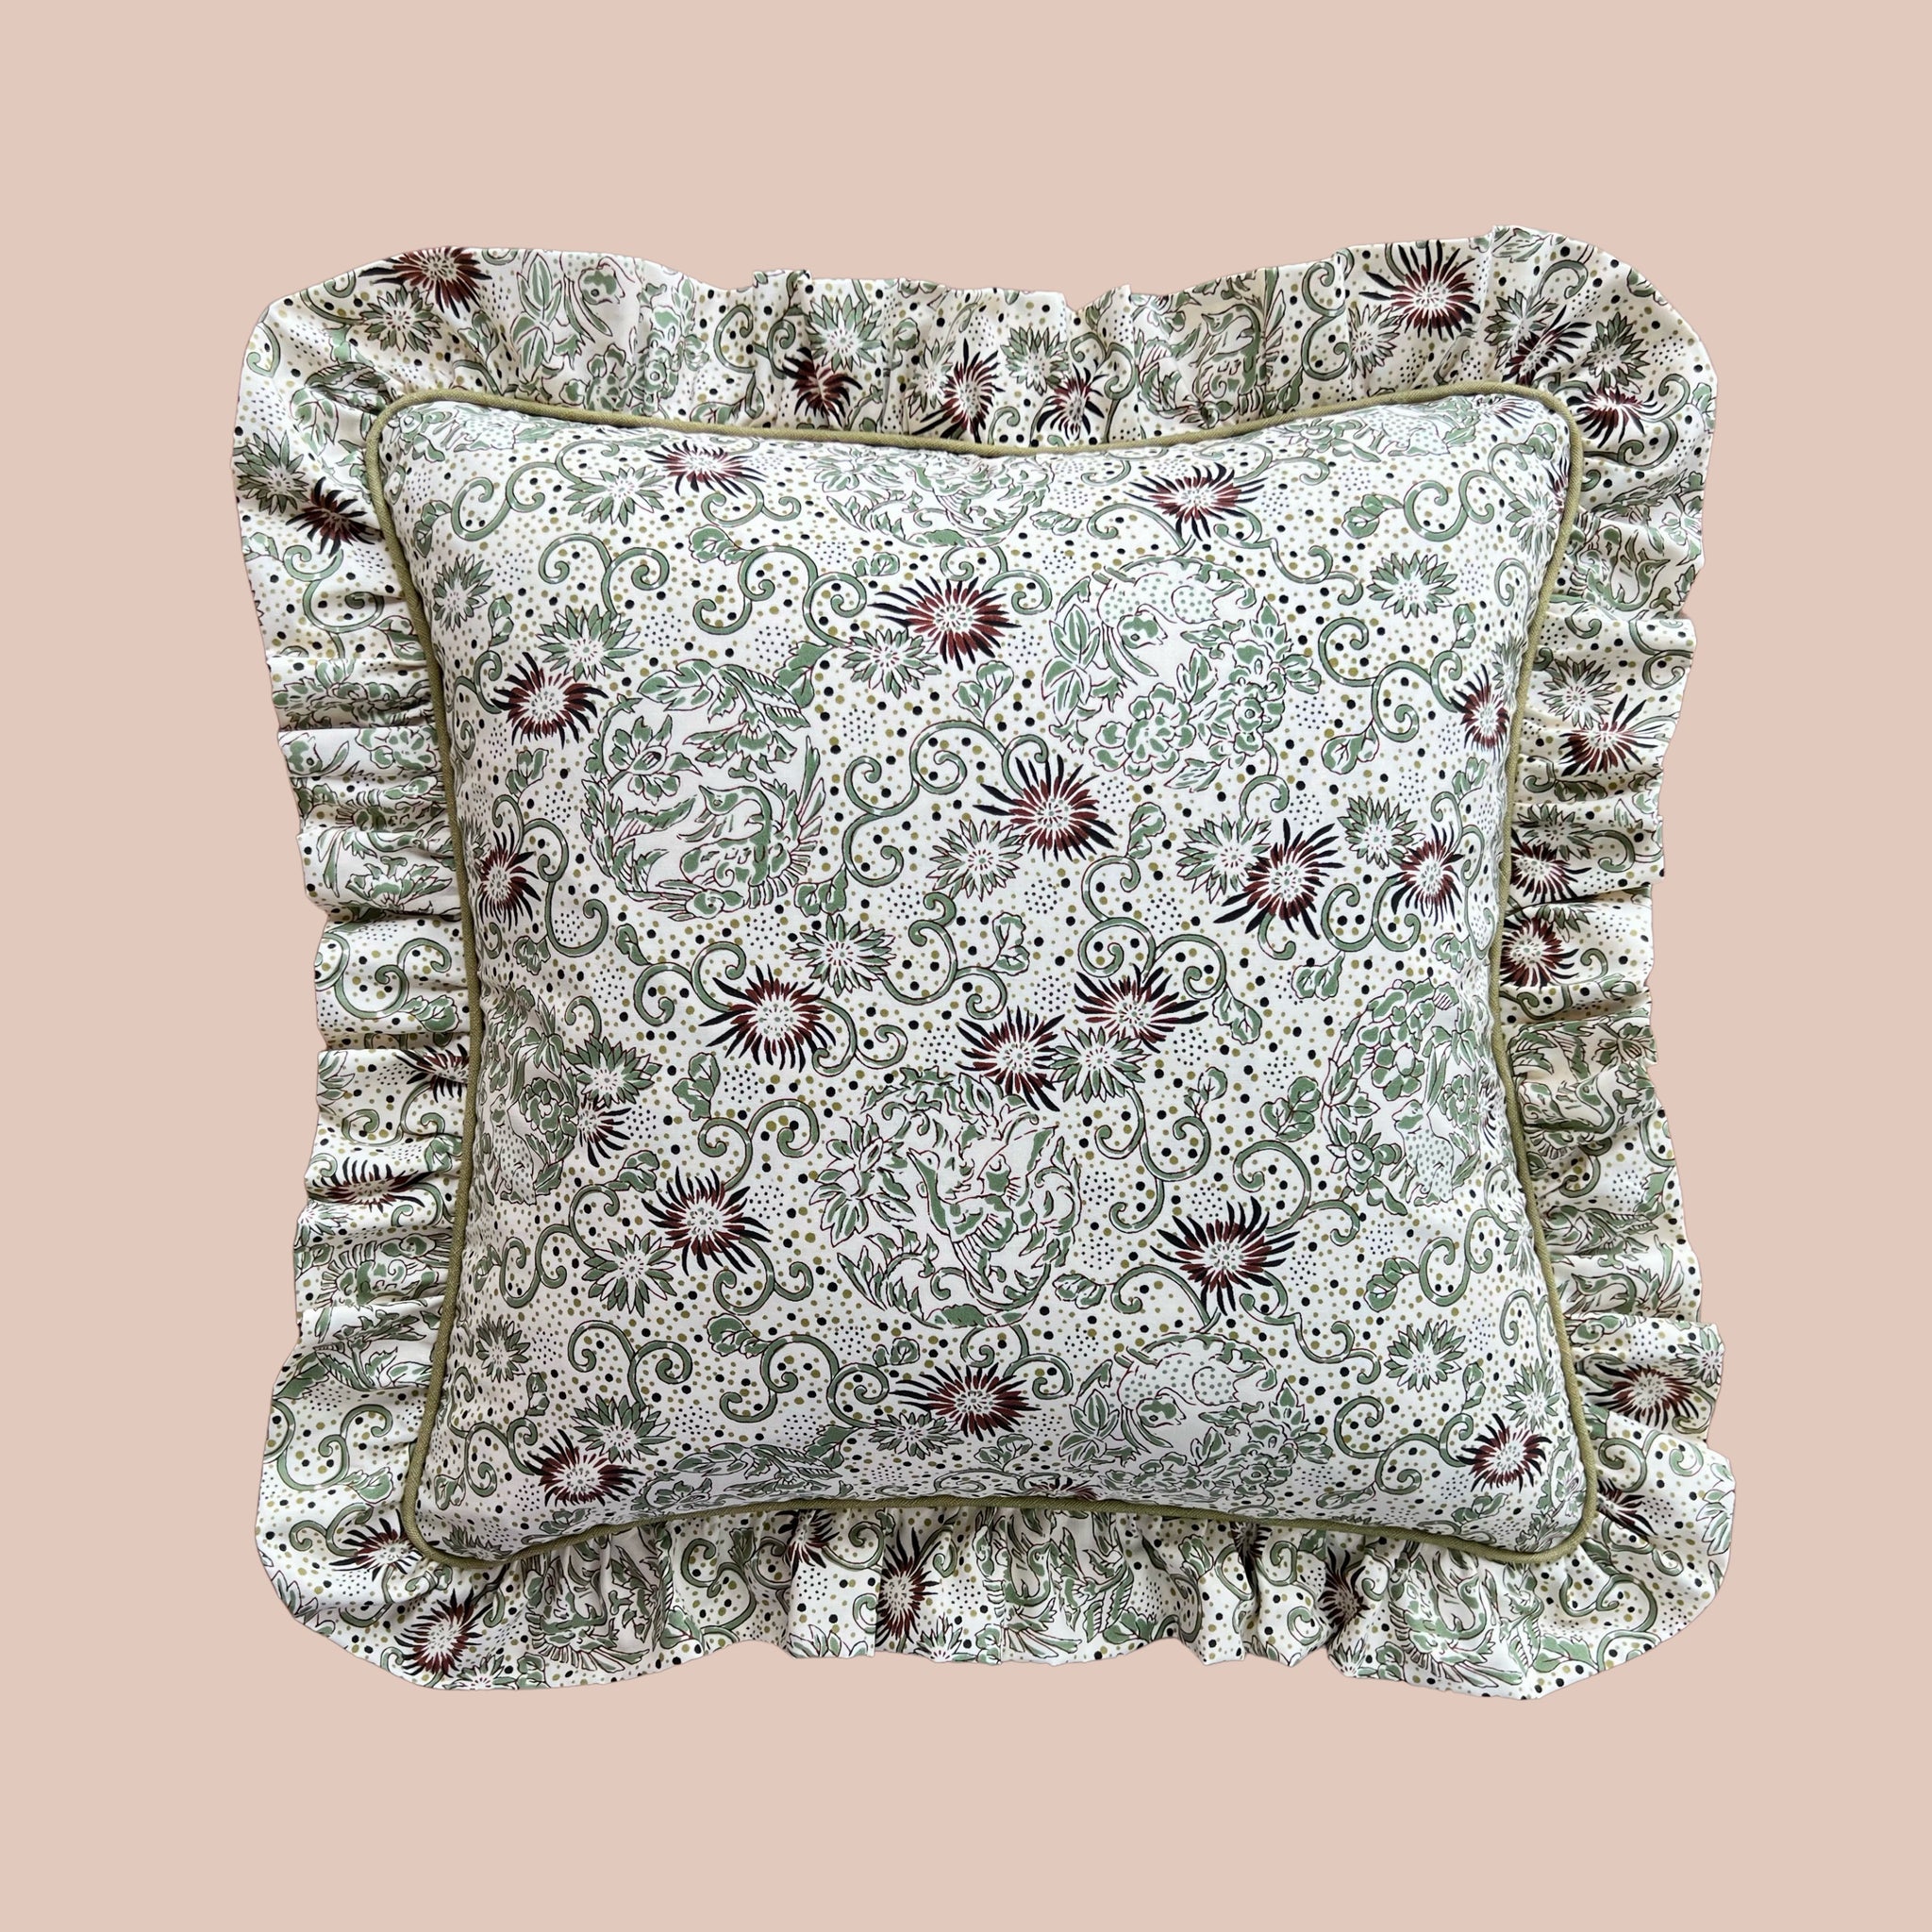 PRE-ORDER Pierre Frey "Butterfly" Cushion with Olive Piping and Ruffle